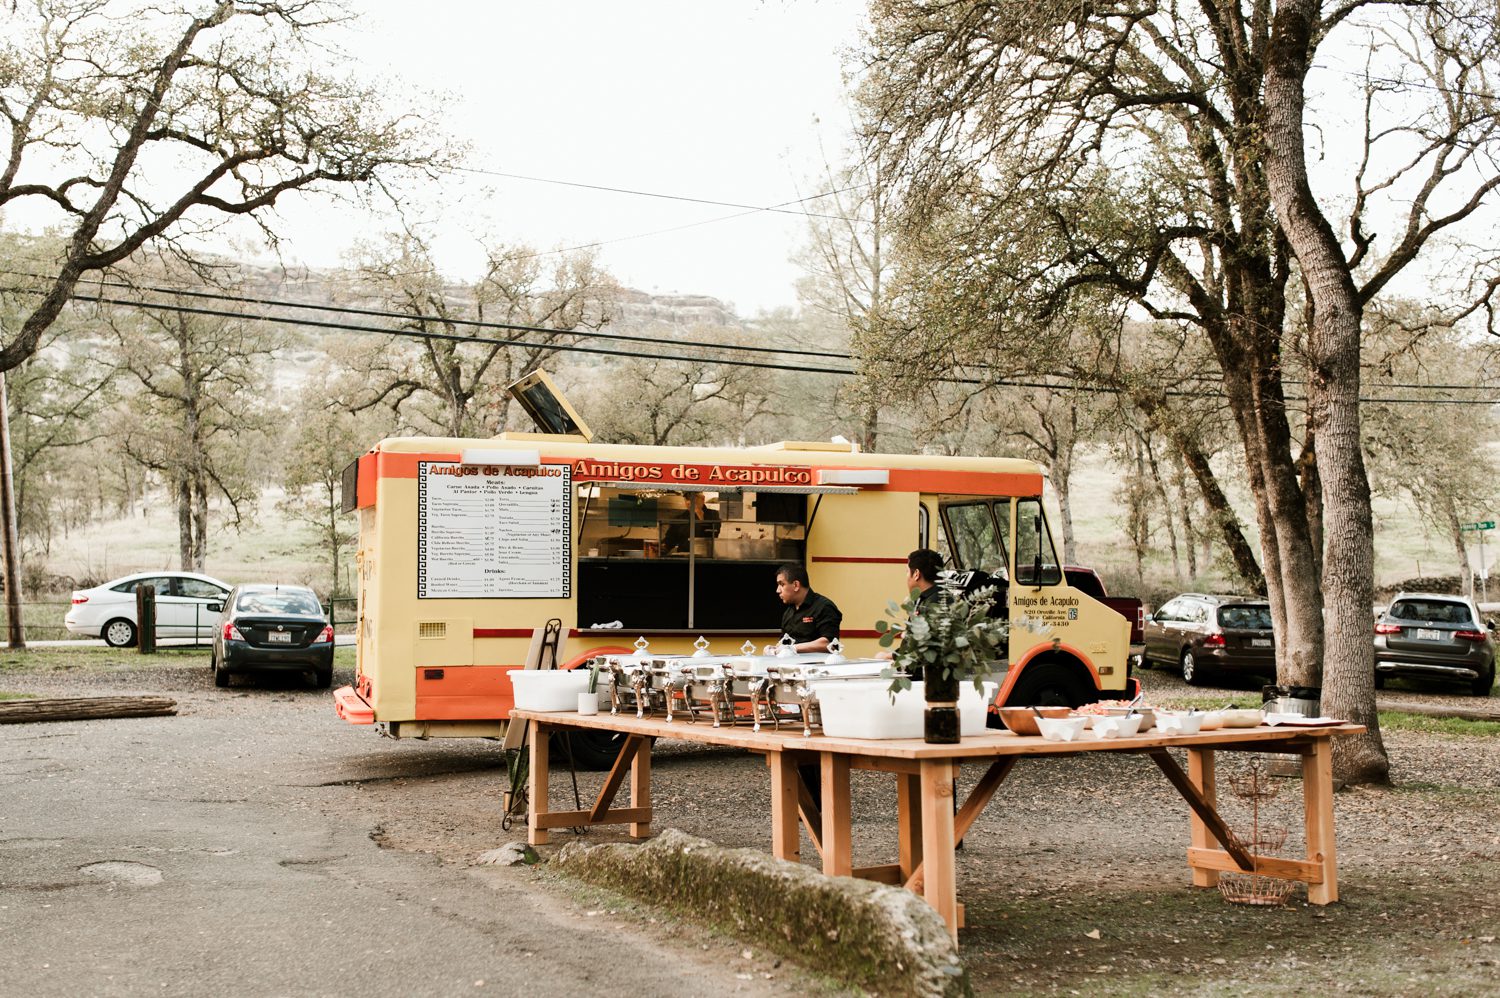 A taco truck prepares dinner for the wedding guests. By West Coast wedding photographer Briana Morrison